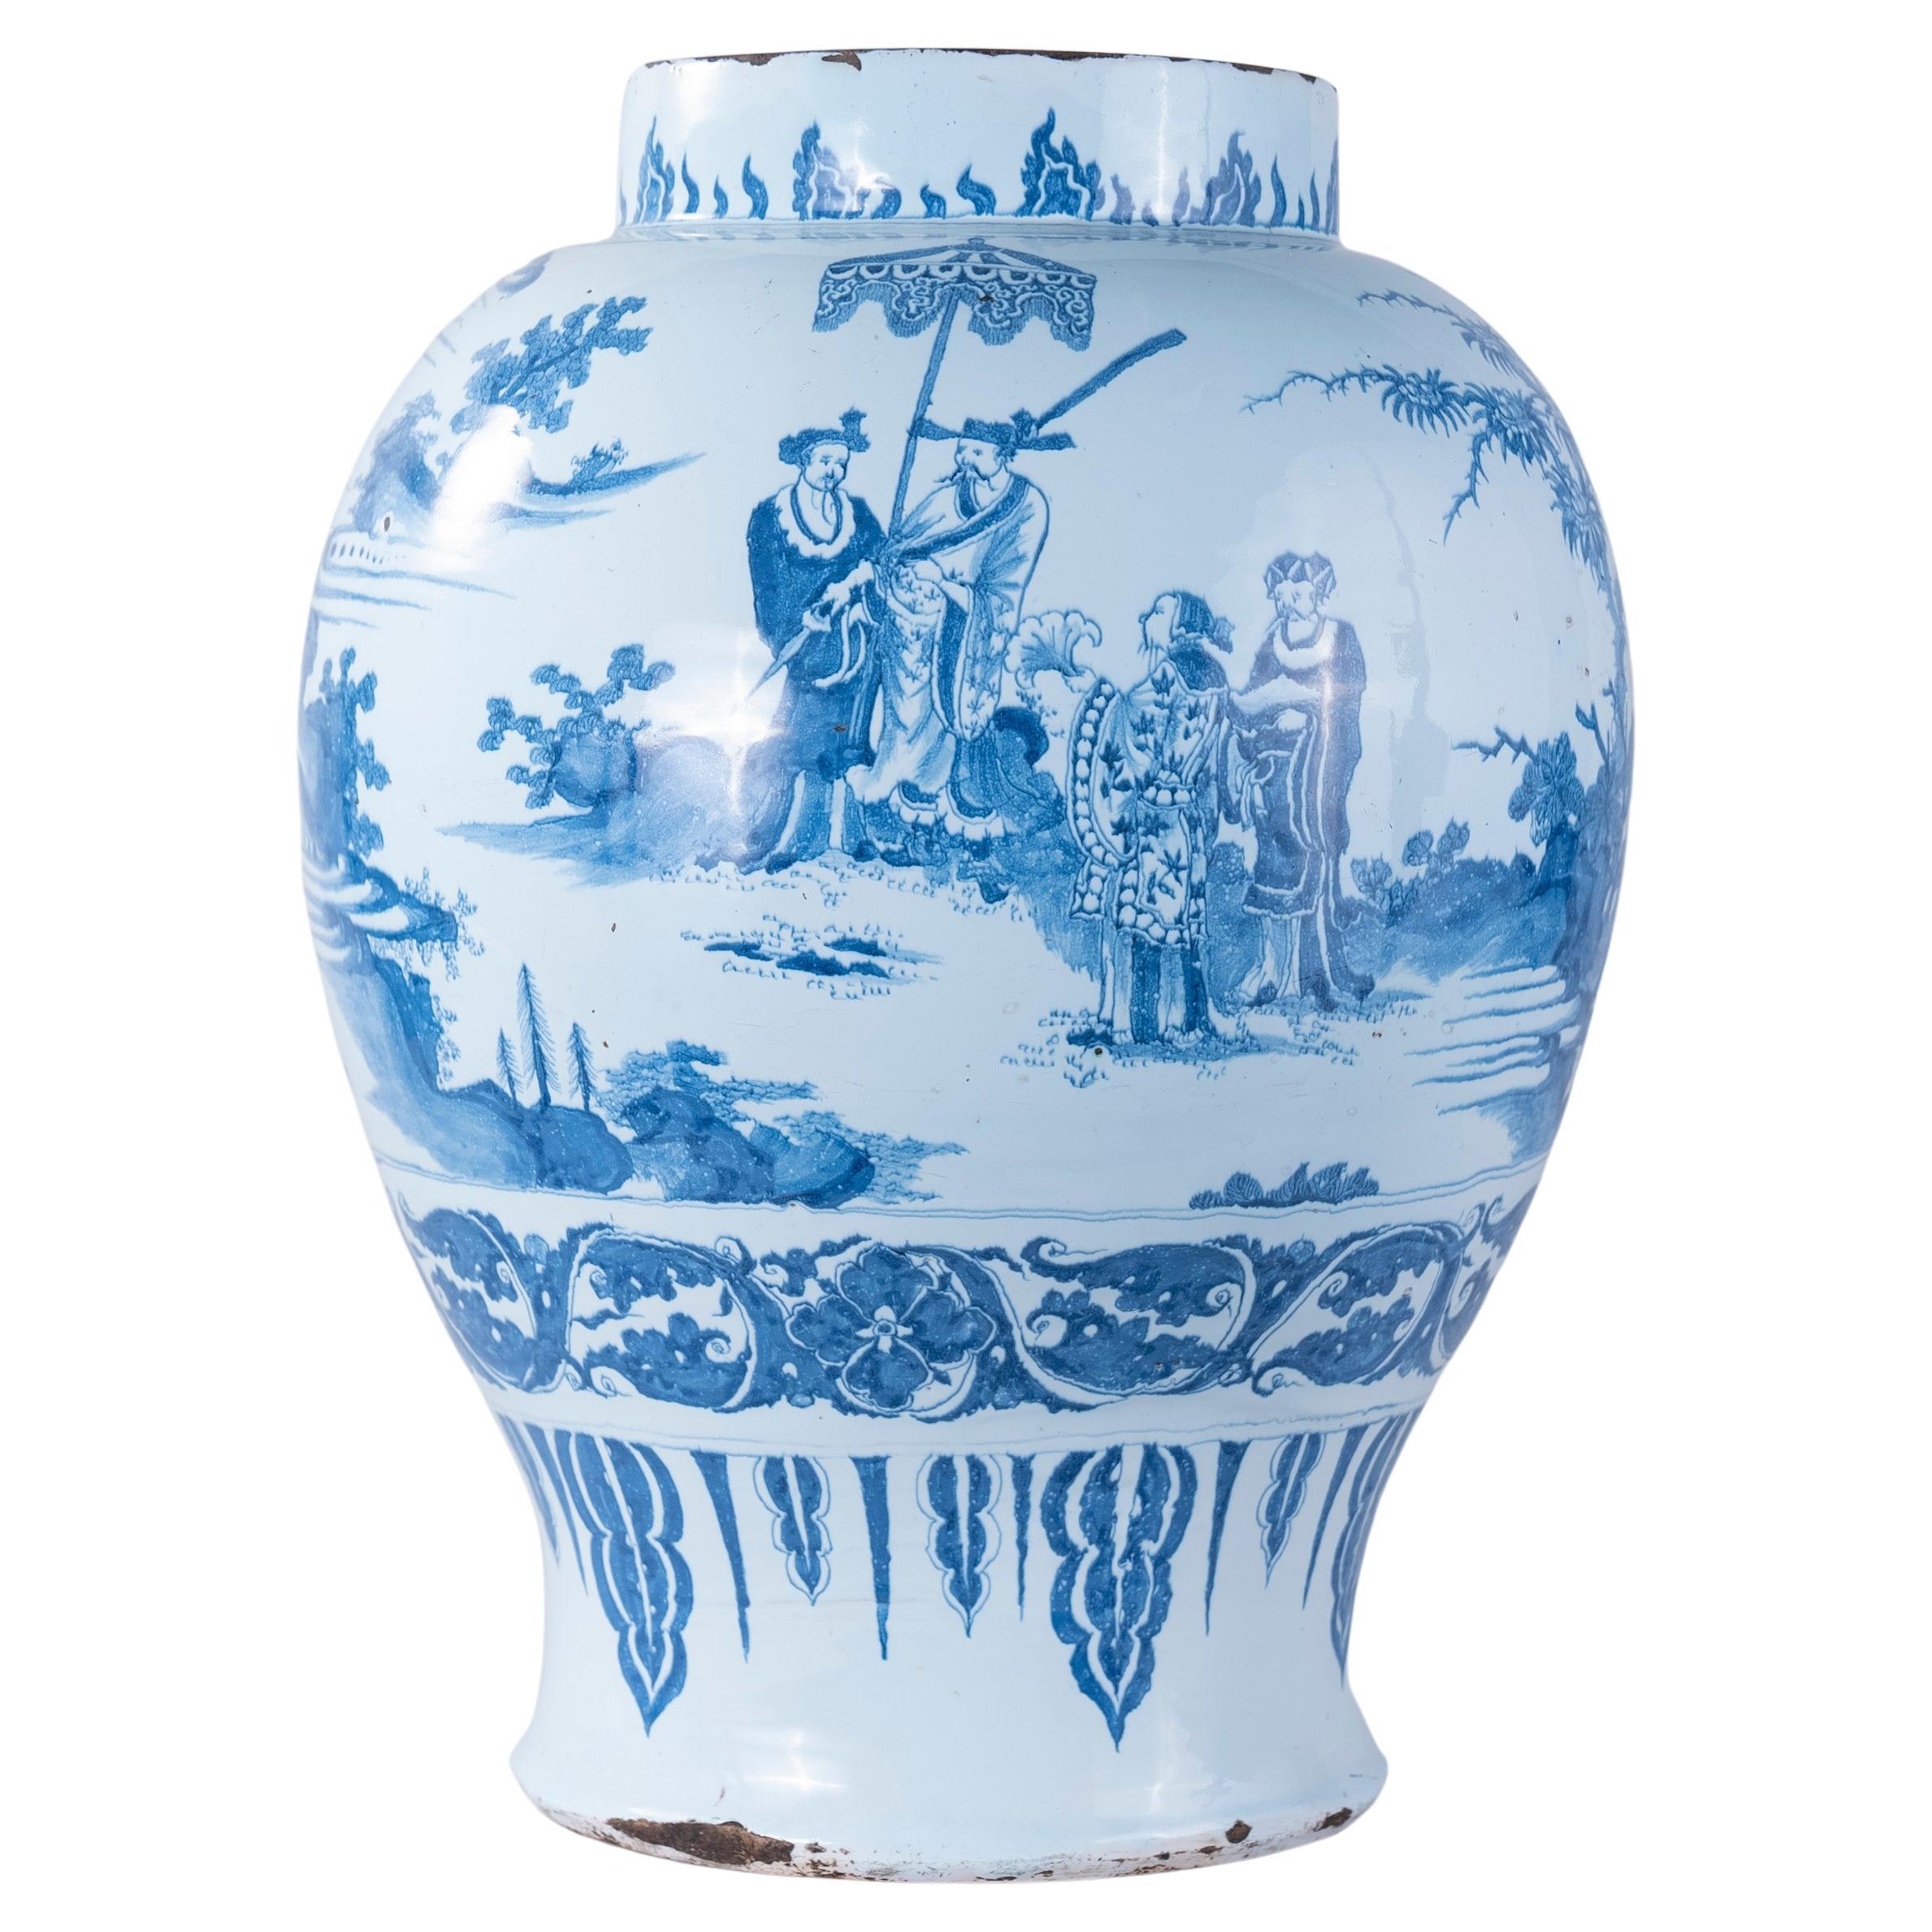 Spectacular Dutch Delft Vase of Large Proportions, circa 1680